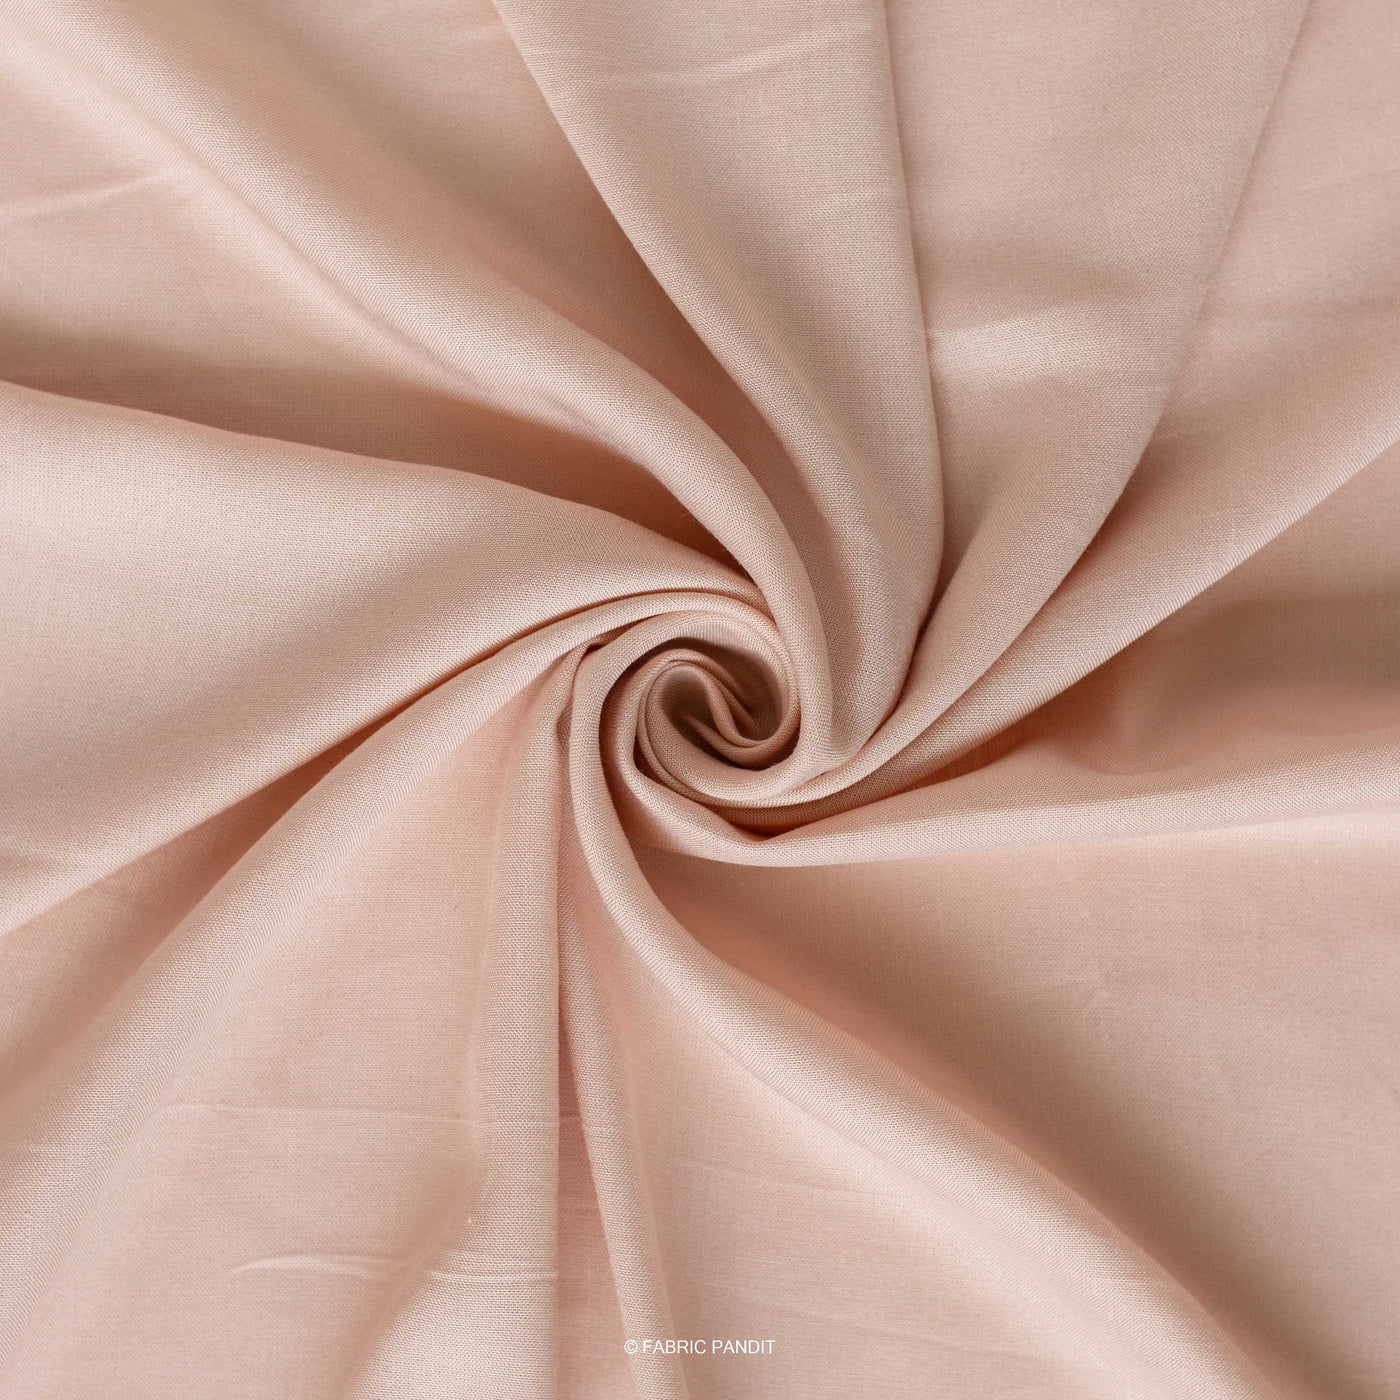 Fabric Pandit Fabric Oyster Pink Color Pure Rayon Fabric